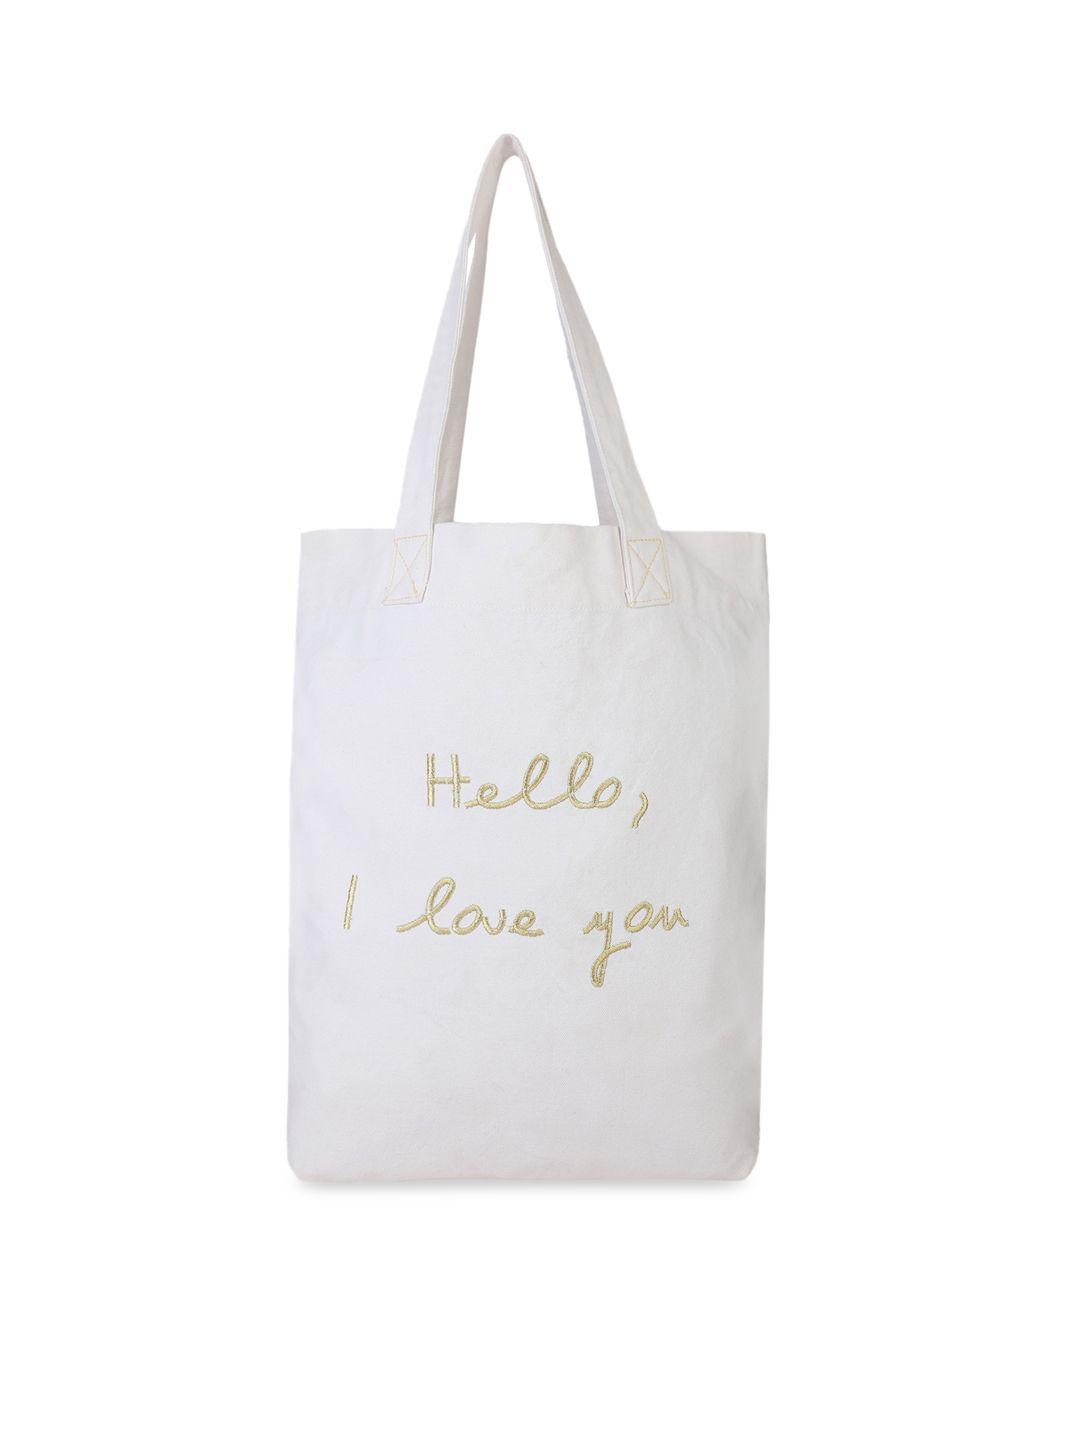 rediscover fashion typography printed oversized shopper tote bag